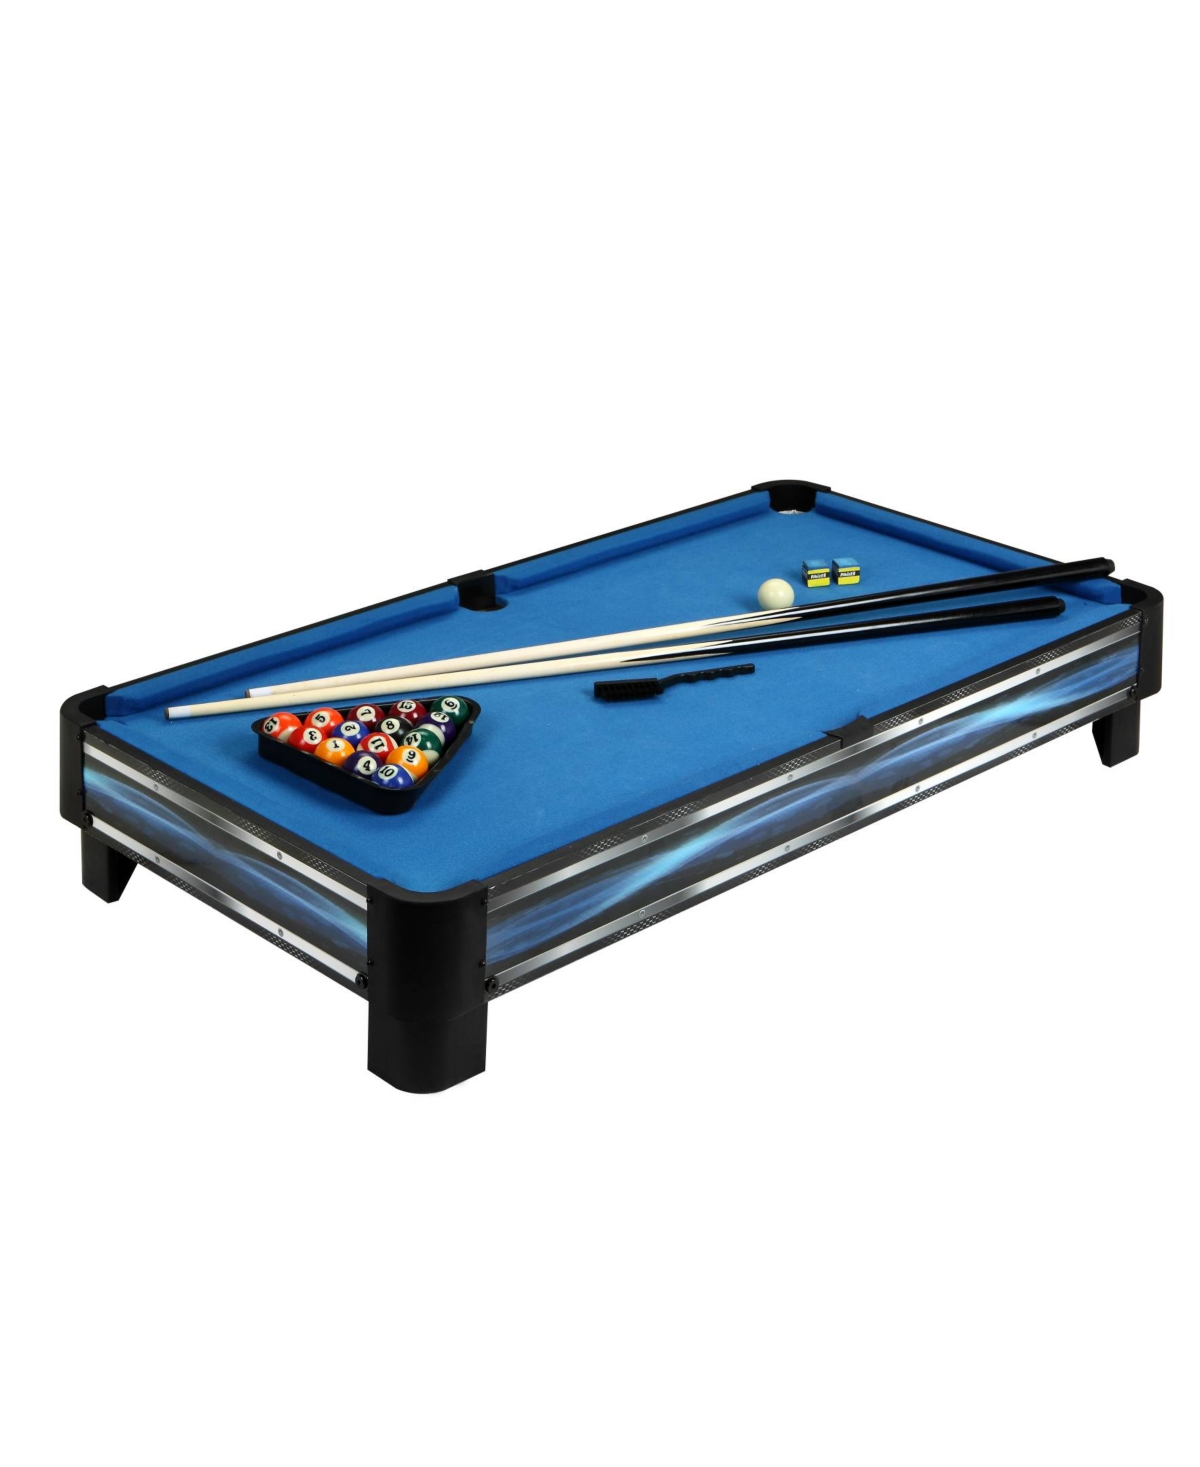 Breakout 40" Tabletop Pool Table - Blue